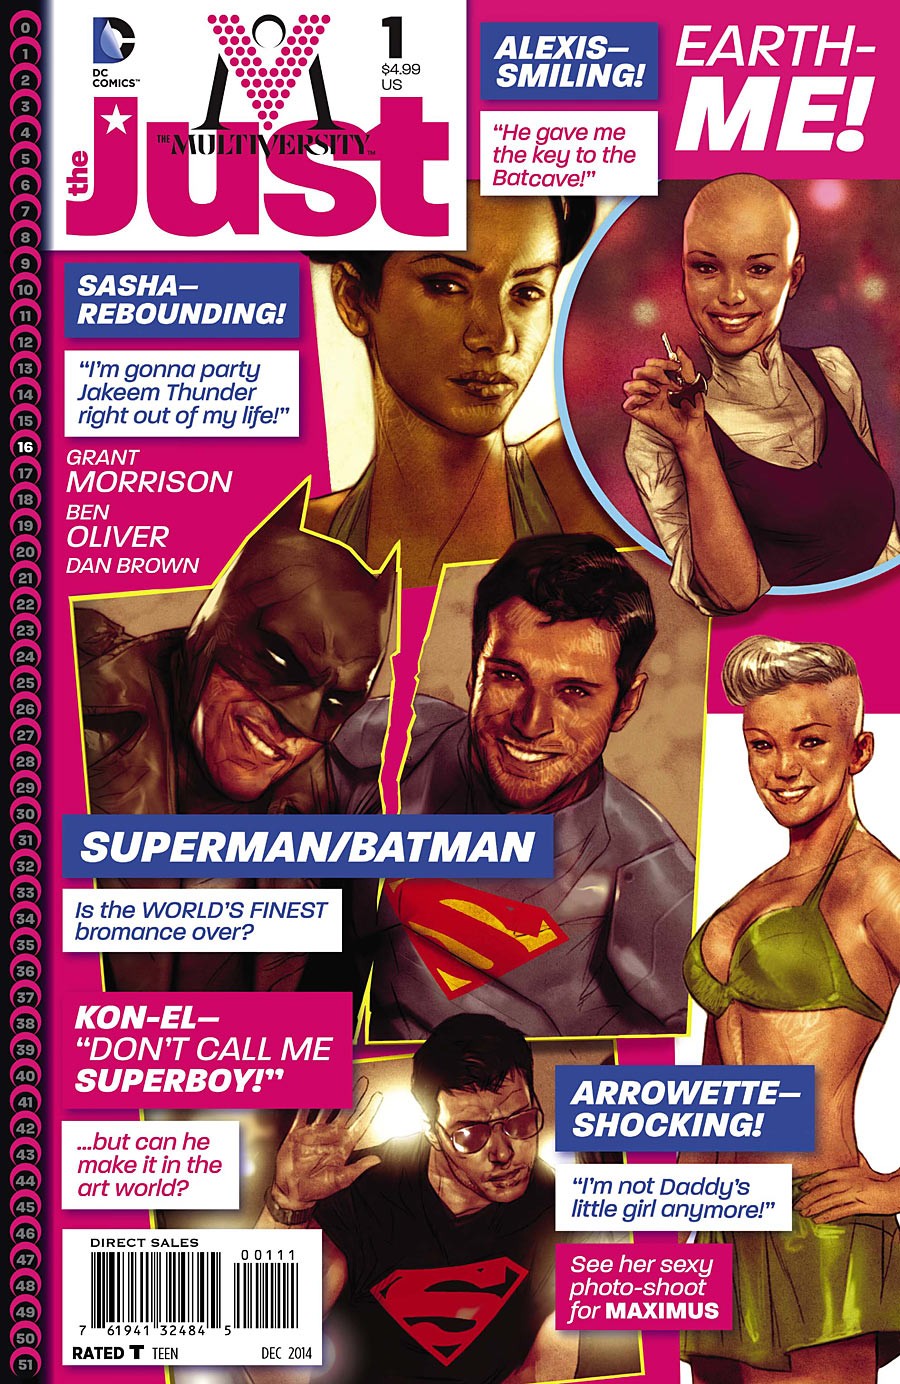 The Multiversity: The Just Vol. 1 #1